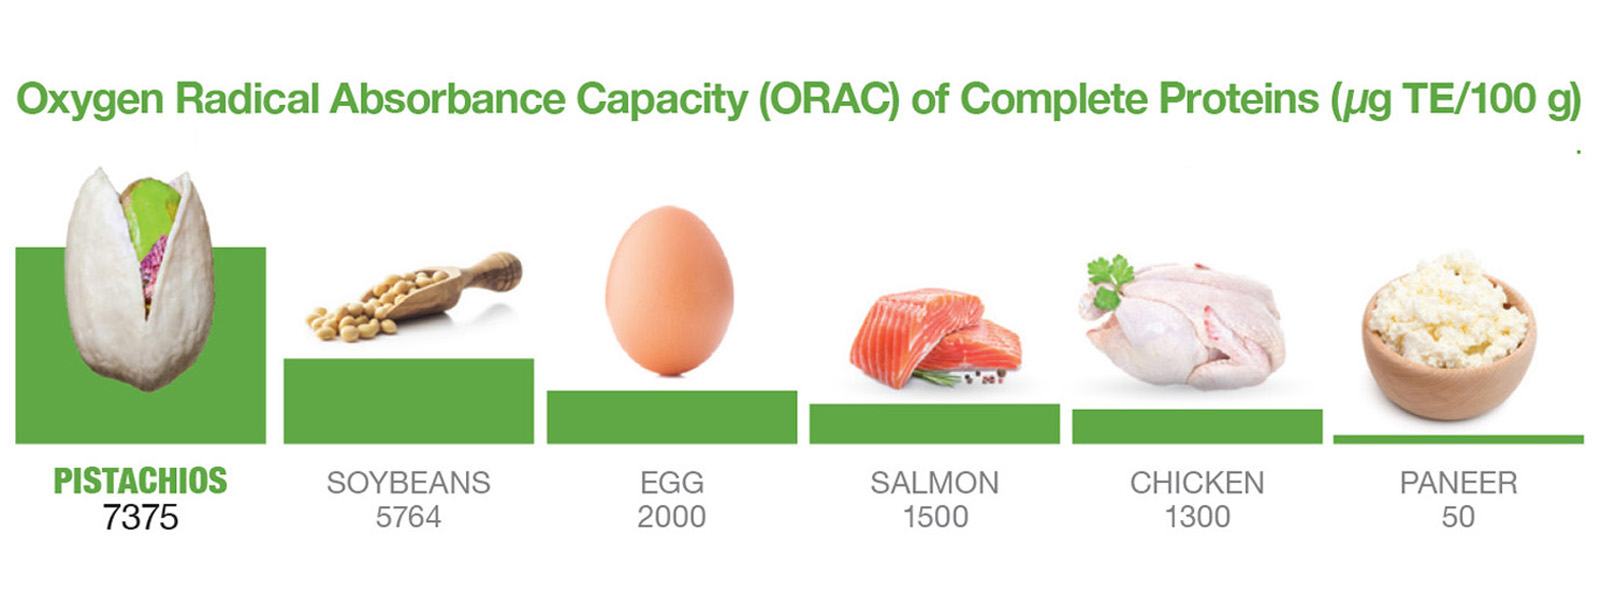 Oxygen Radical Absorbance (ORAC) of Complete Proteins Chart